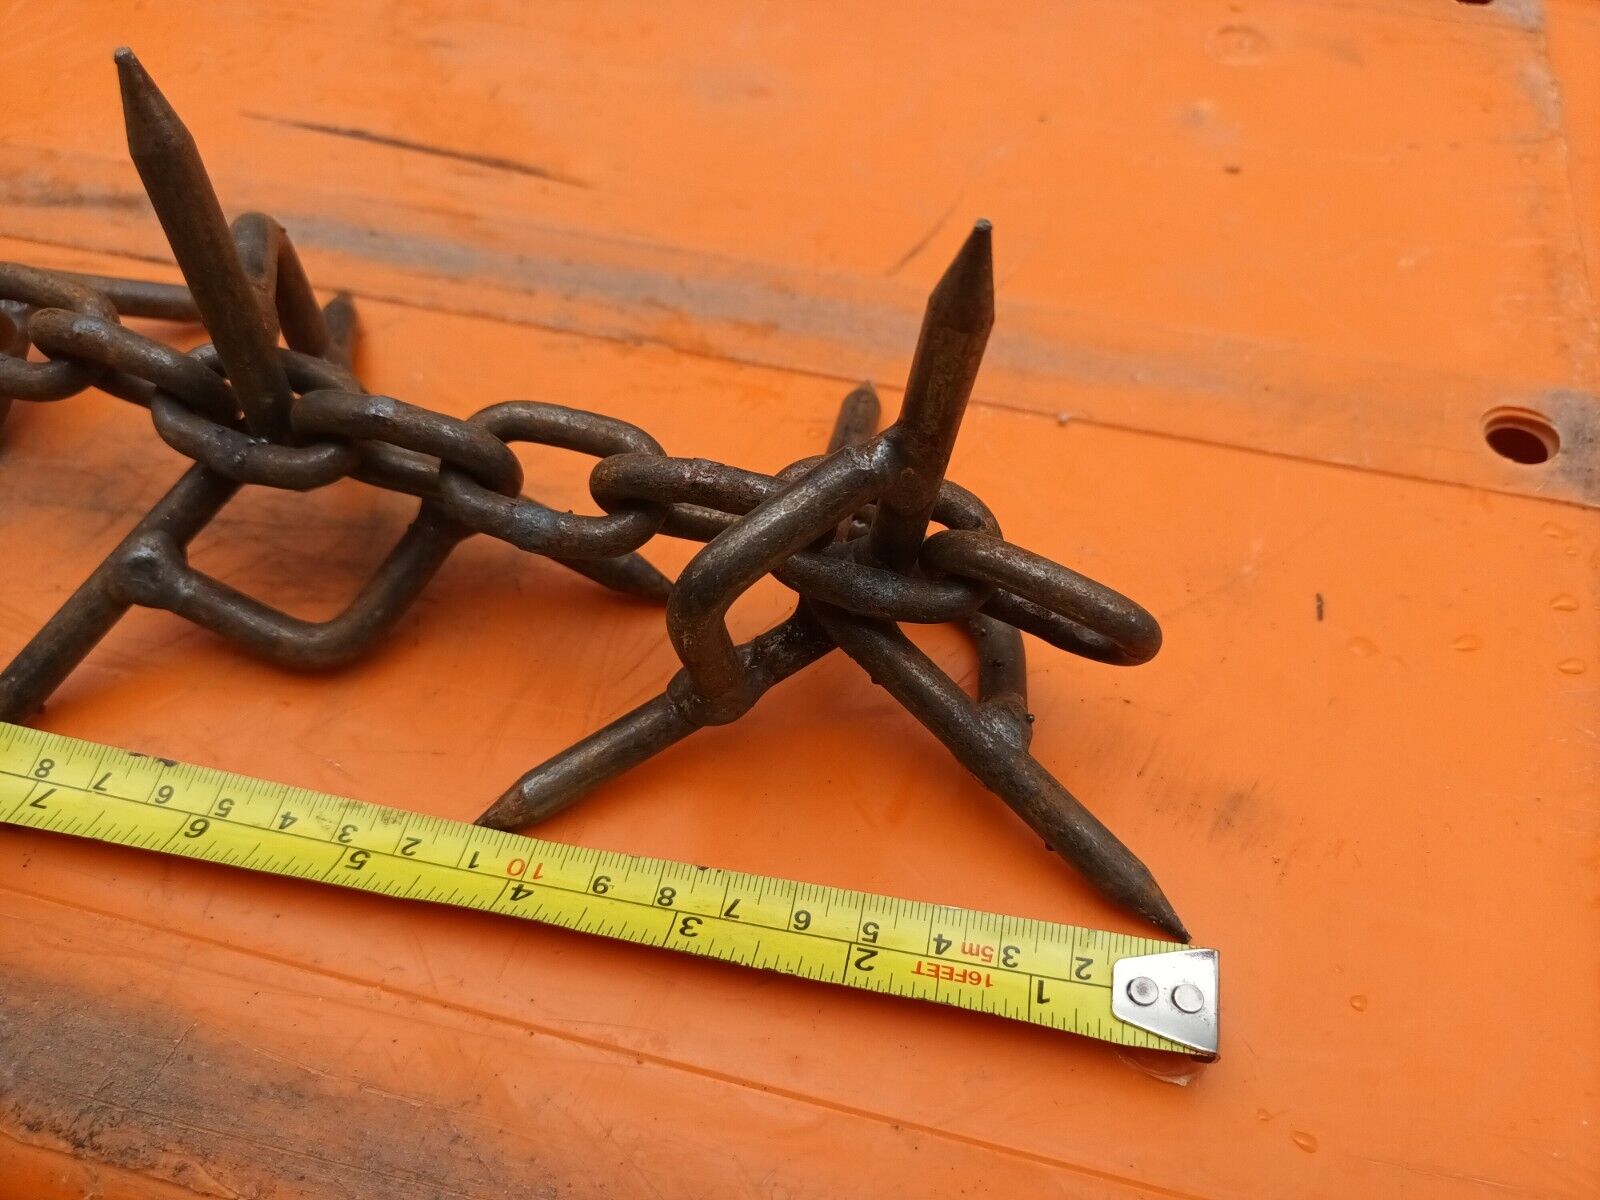 Caltrop Chains Tyre Spikes Very Heavy Duty Approximately 6 foot